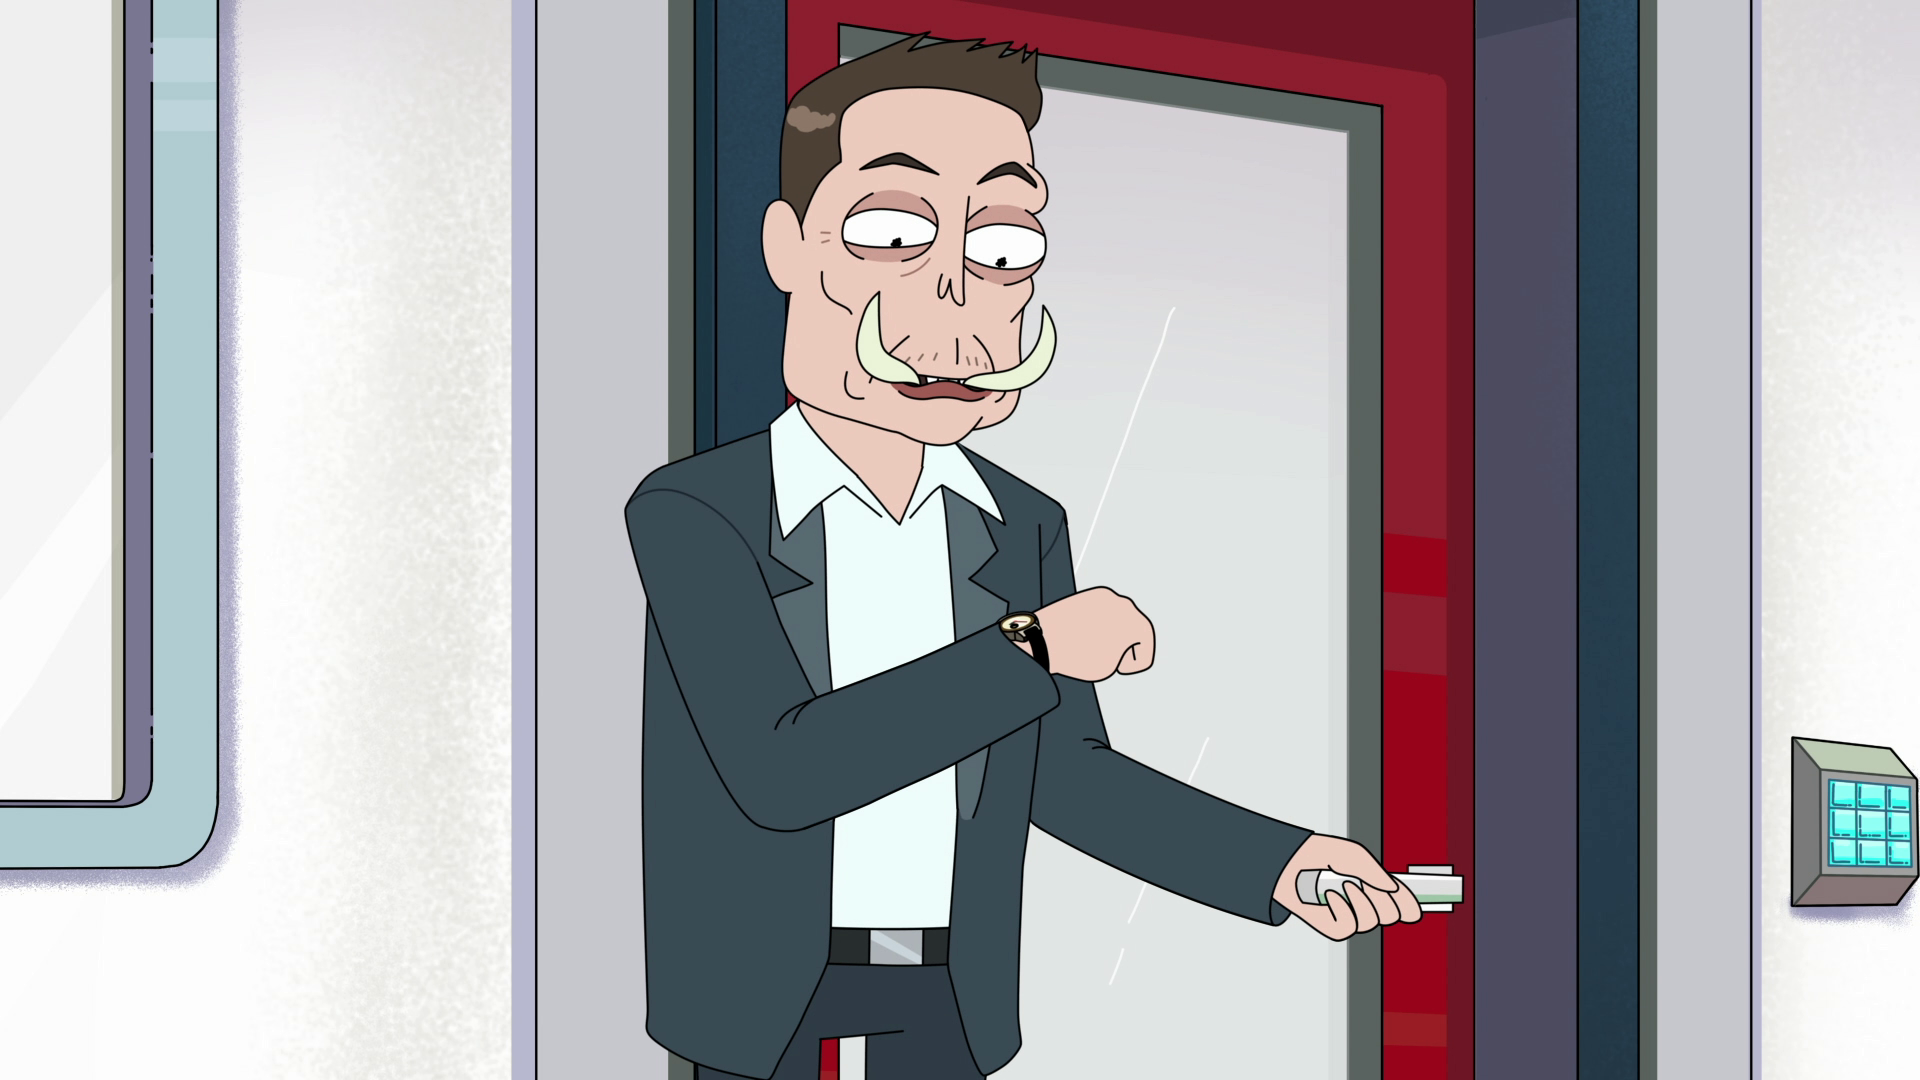 Elon Tusk (Elon Musk) checks his schedule in Rick and Morty Season 4 Episode 3 "One Crew Over the Crewcoo's Morty" (2019), Adult Swim